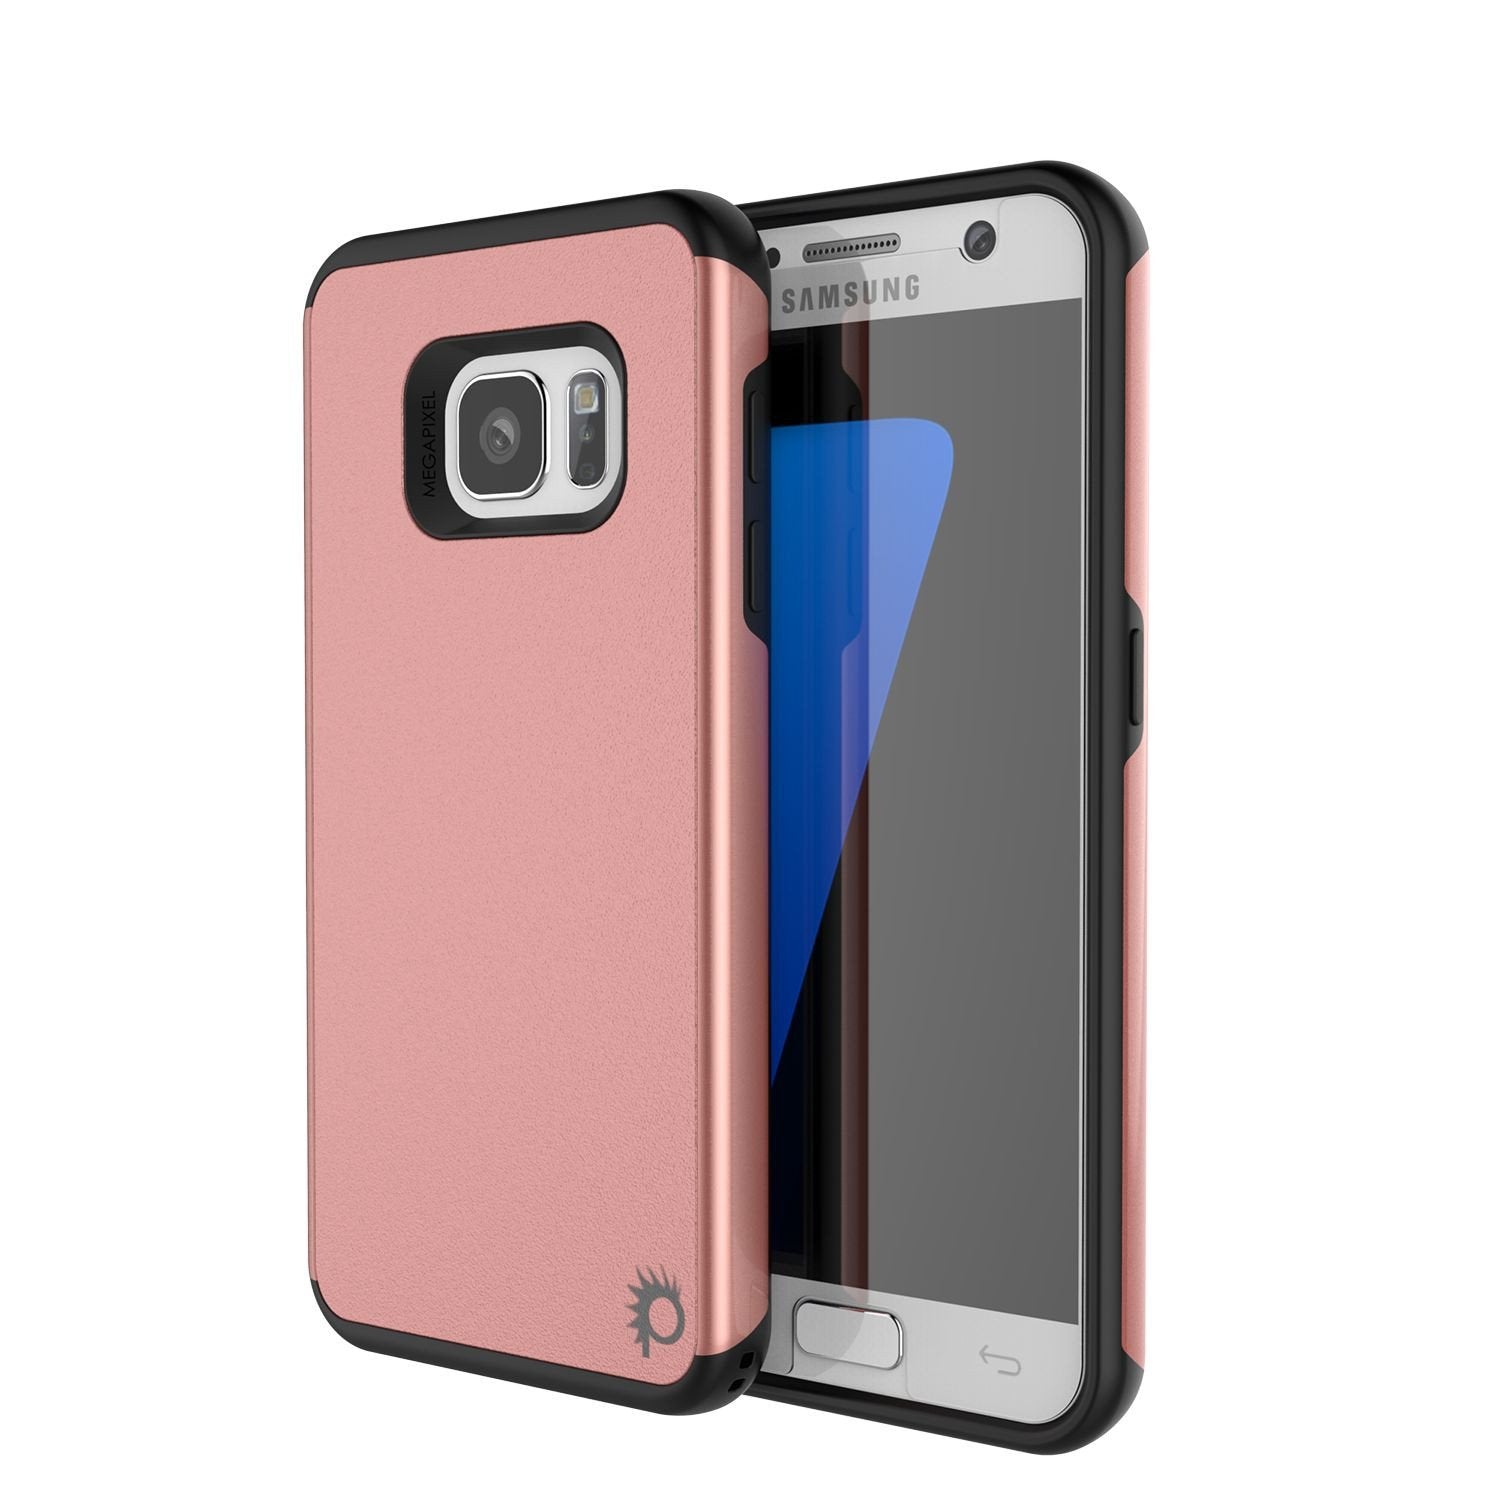 Galaxy s7 Case PunkCase Galactic Rose Gold Series Slim Armor Soft Cover Case w/ Tempered Glass - PunkCase NZ